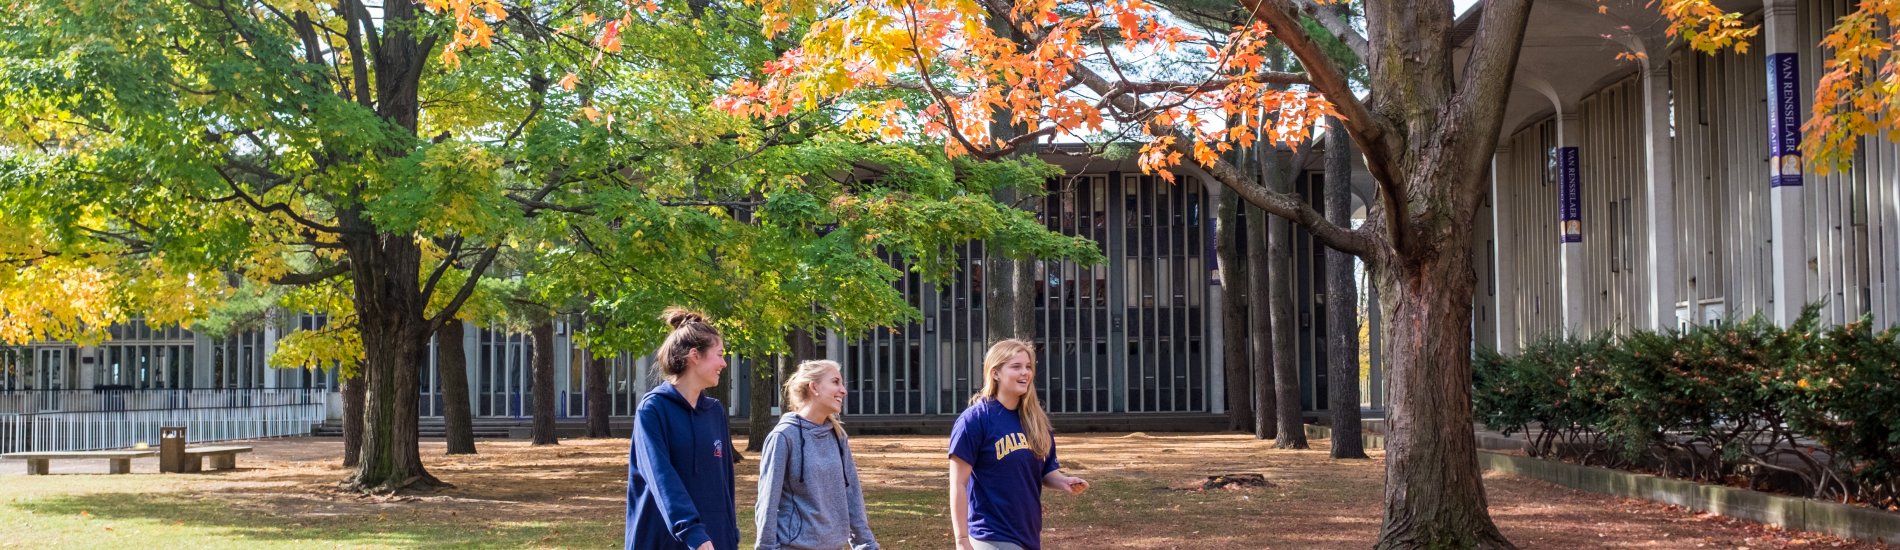 Three students walk across a residential quad surrounded by fall foliage